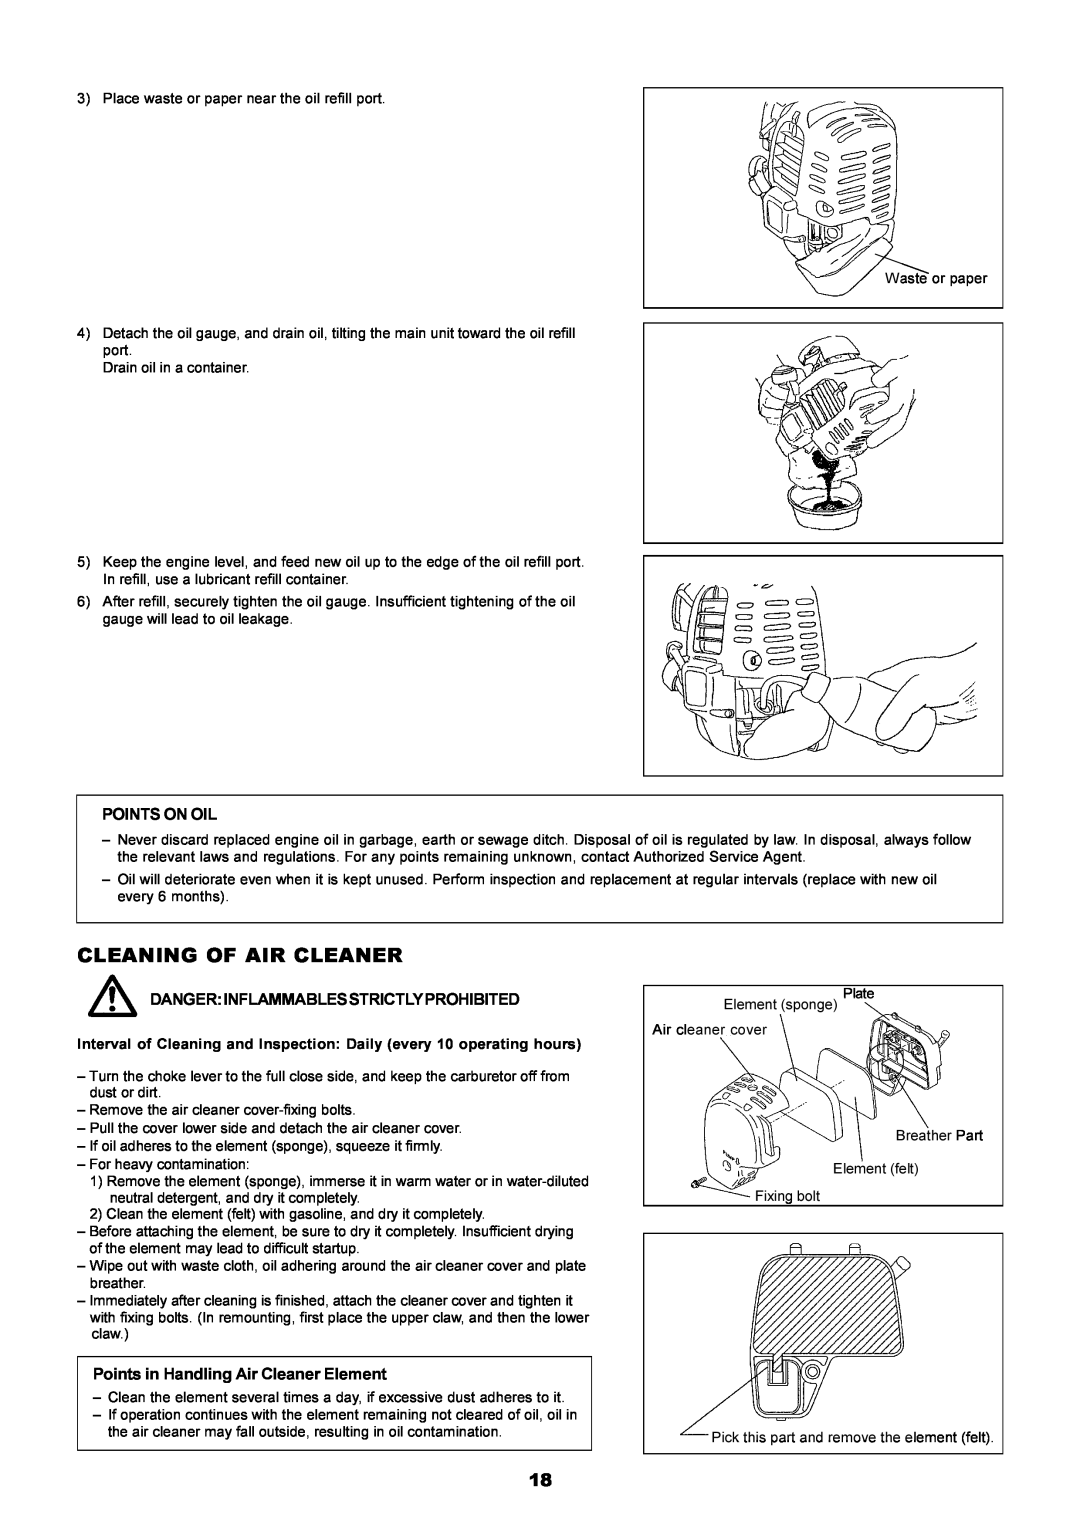 Dolmar MS-251.4, MS-250.4 instruction manual Cleaning Of Air Cleaner, Points On Oil, Dangerinflammablesstrictlyprohibited 